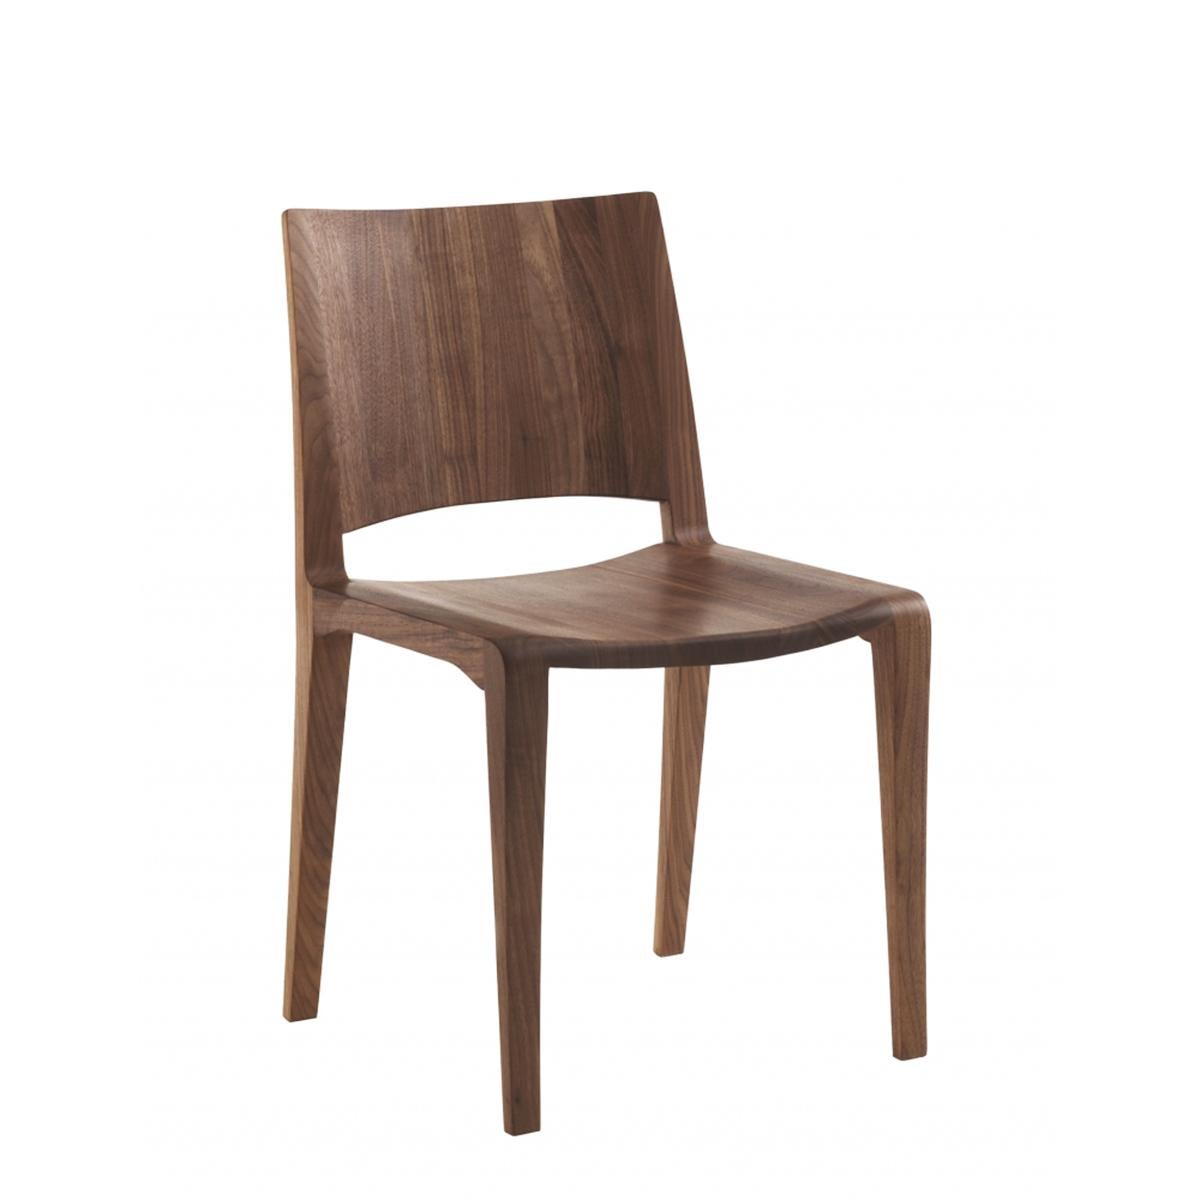 Chair Refined Full with structure in solid walnut wood,
wood treated with wax with natural pine extracts.
Also available in oak or in burnt finish, on request.